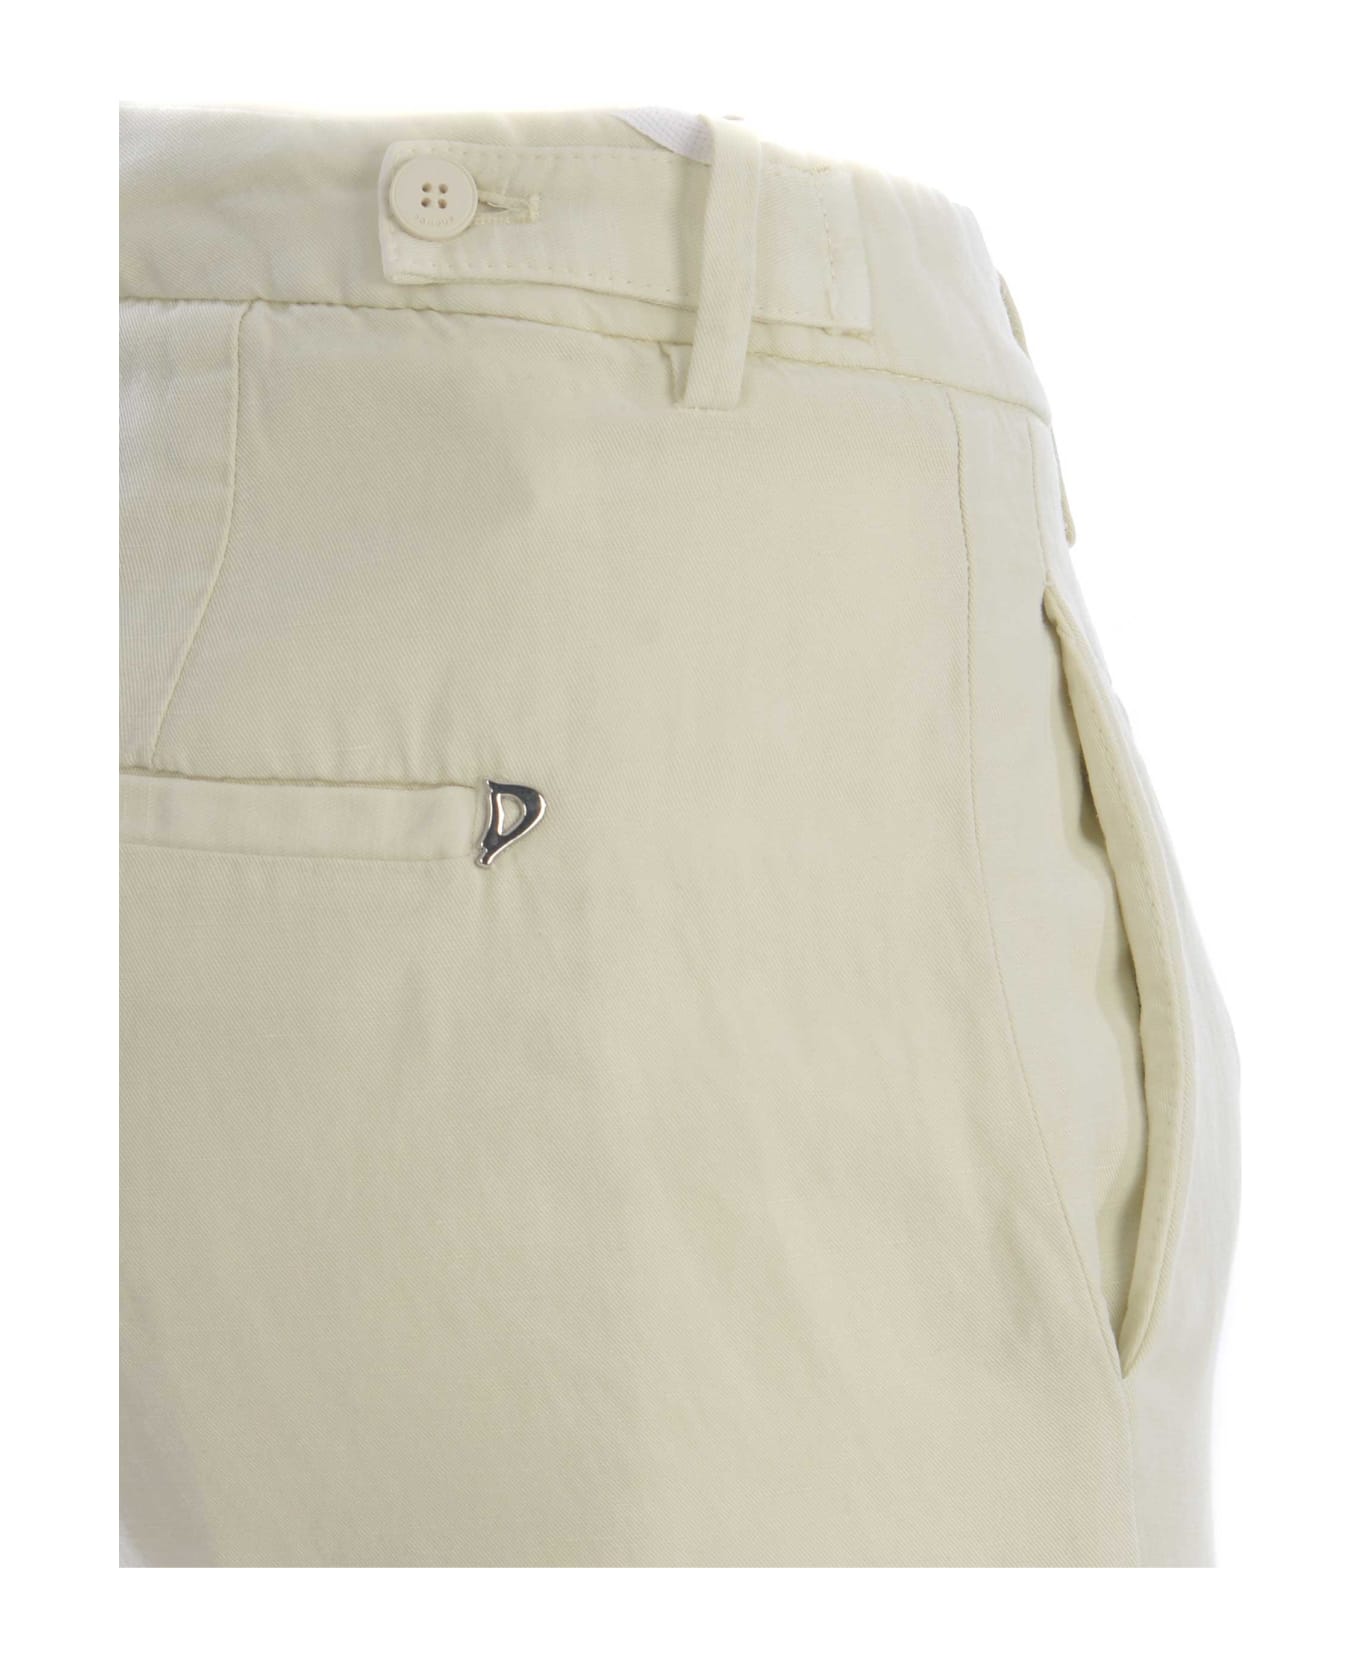 Dondup Trousers Dondup "ariel 27inches" Made Of Linen Blend - Crema